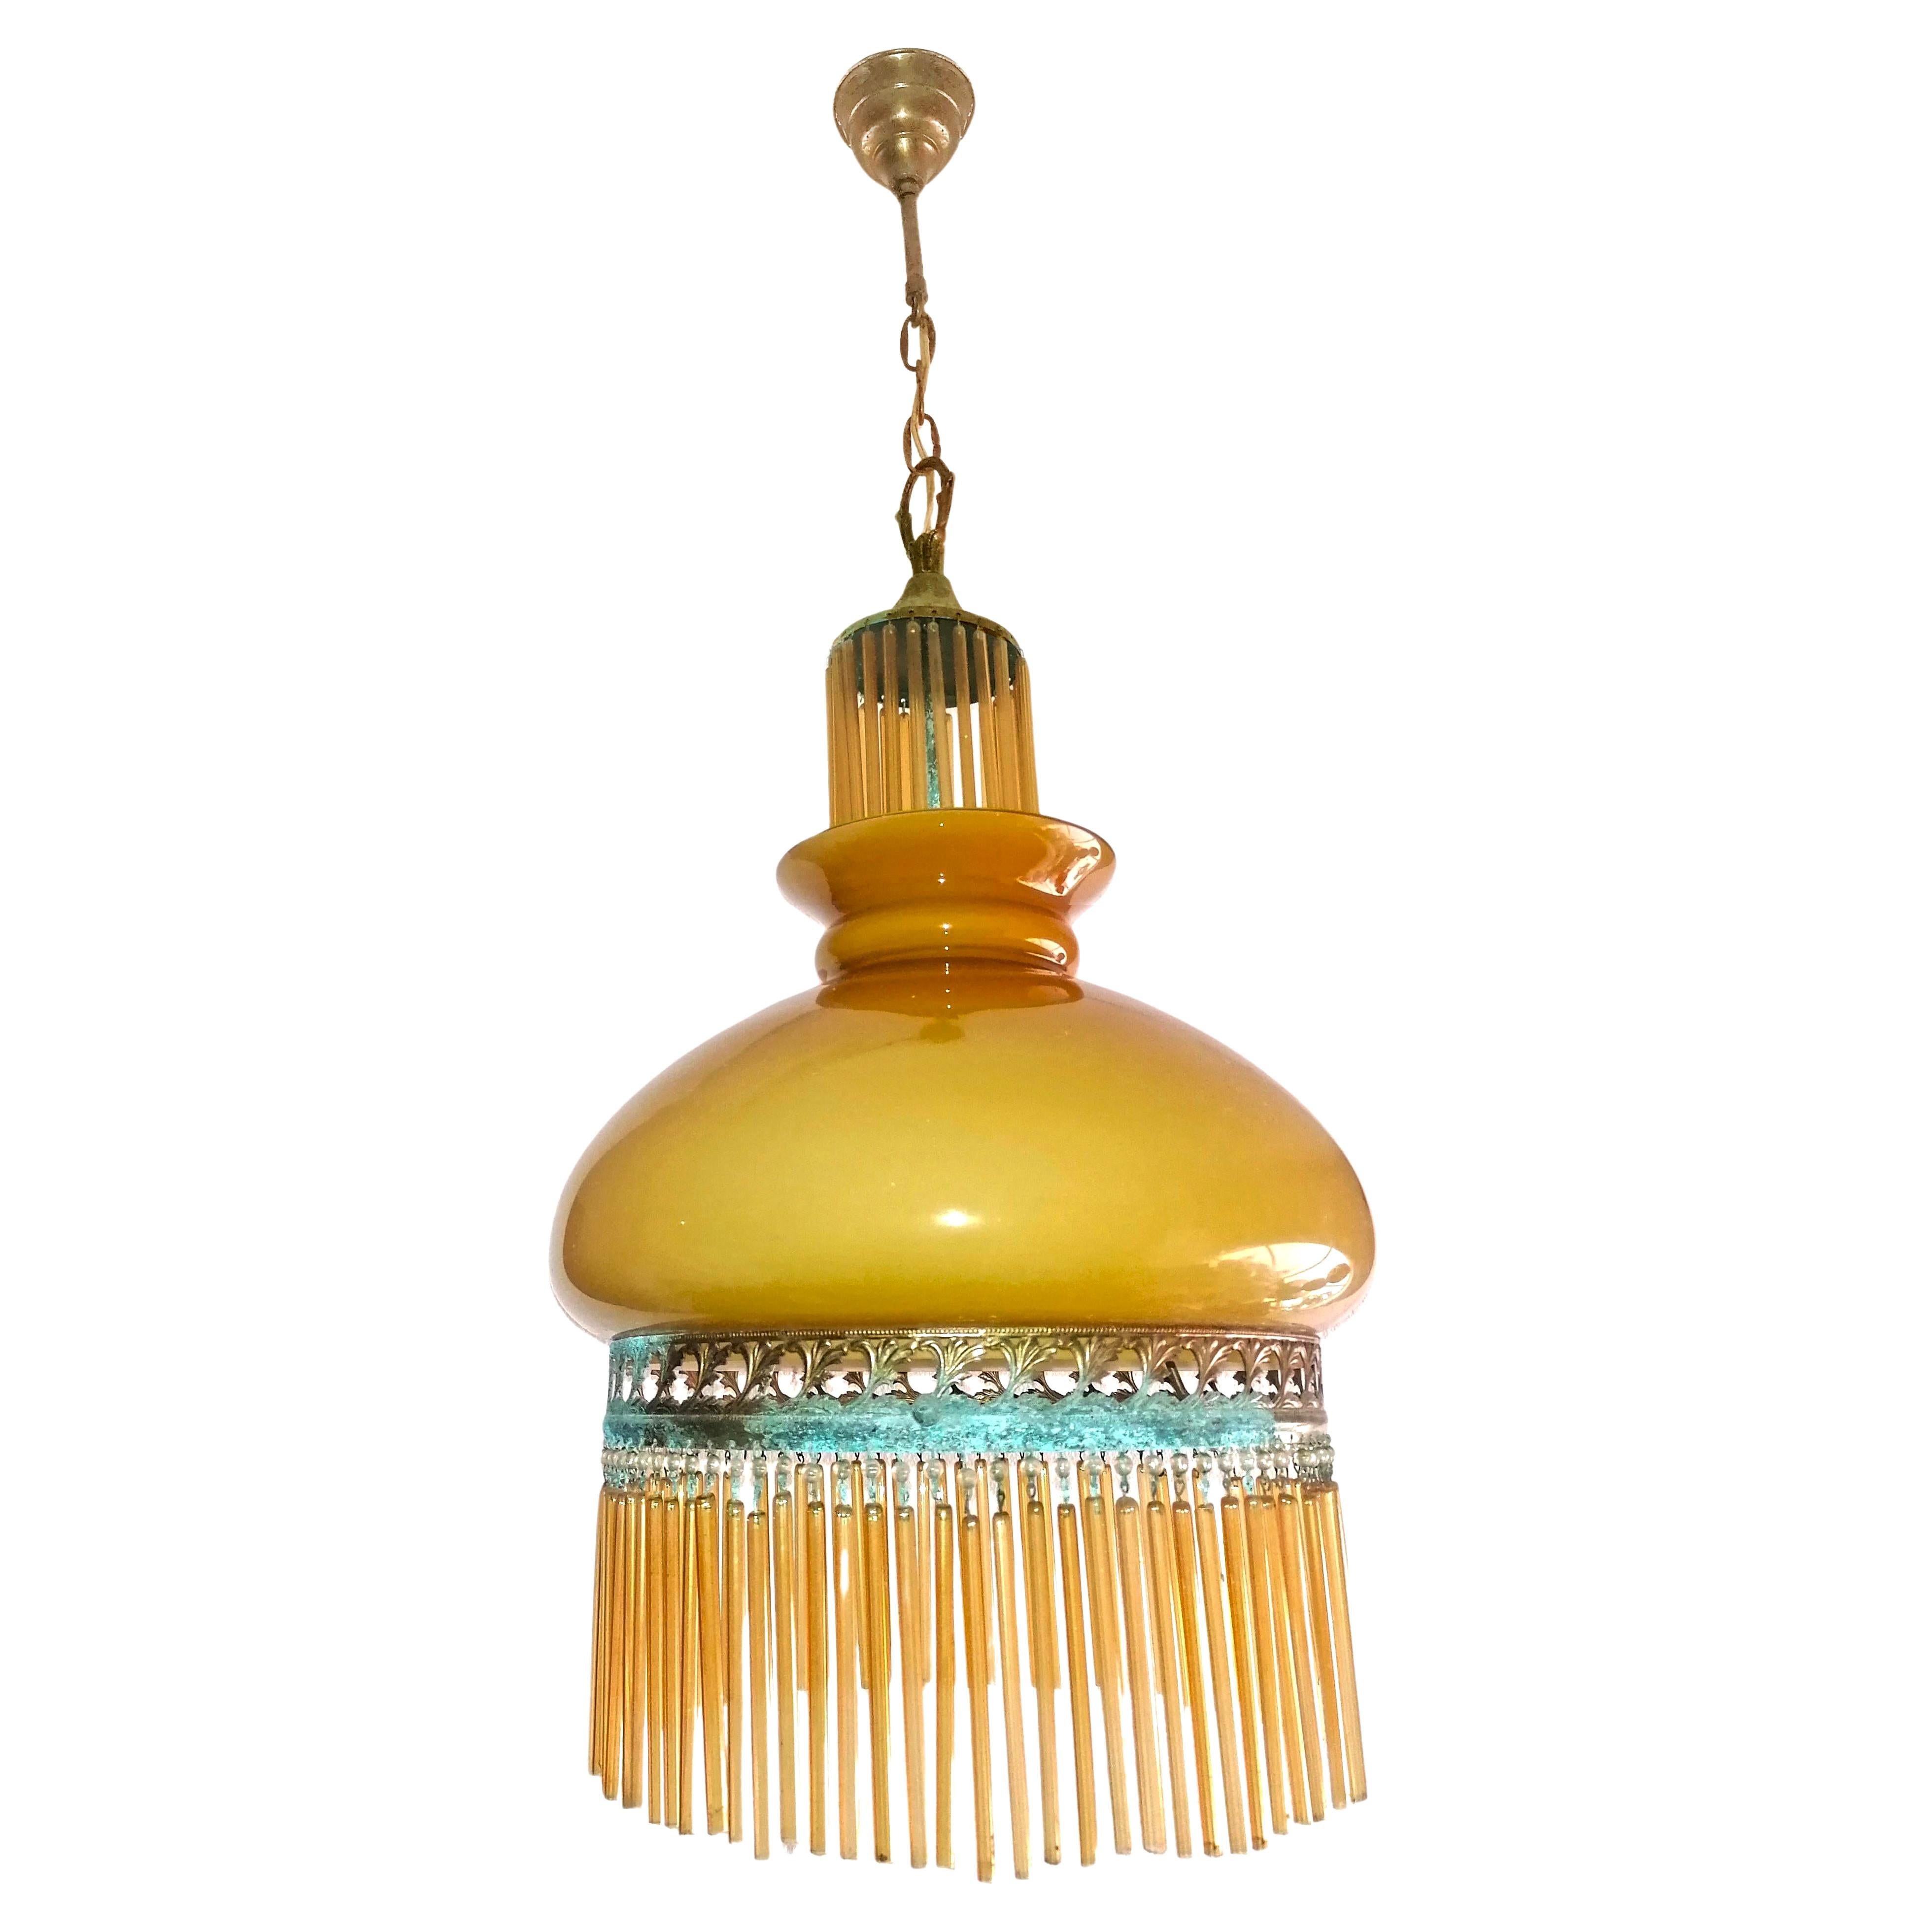 Beautiful Italian midcentury chandelier with Amber Glass & Beaded Glass Fringe in the style of Art Deco and Art Nouveau. Beautiful age patina. 

Dimentions:
Height 31.5 in. (chain/4 in)/ 80 cm (chain/10 cm)
Diameter 14.18 in. (36 cm)   
One light